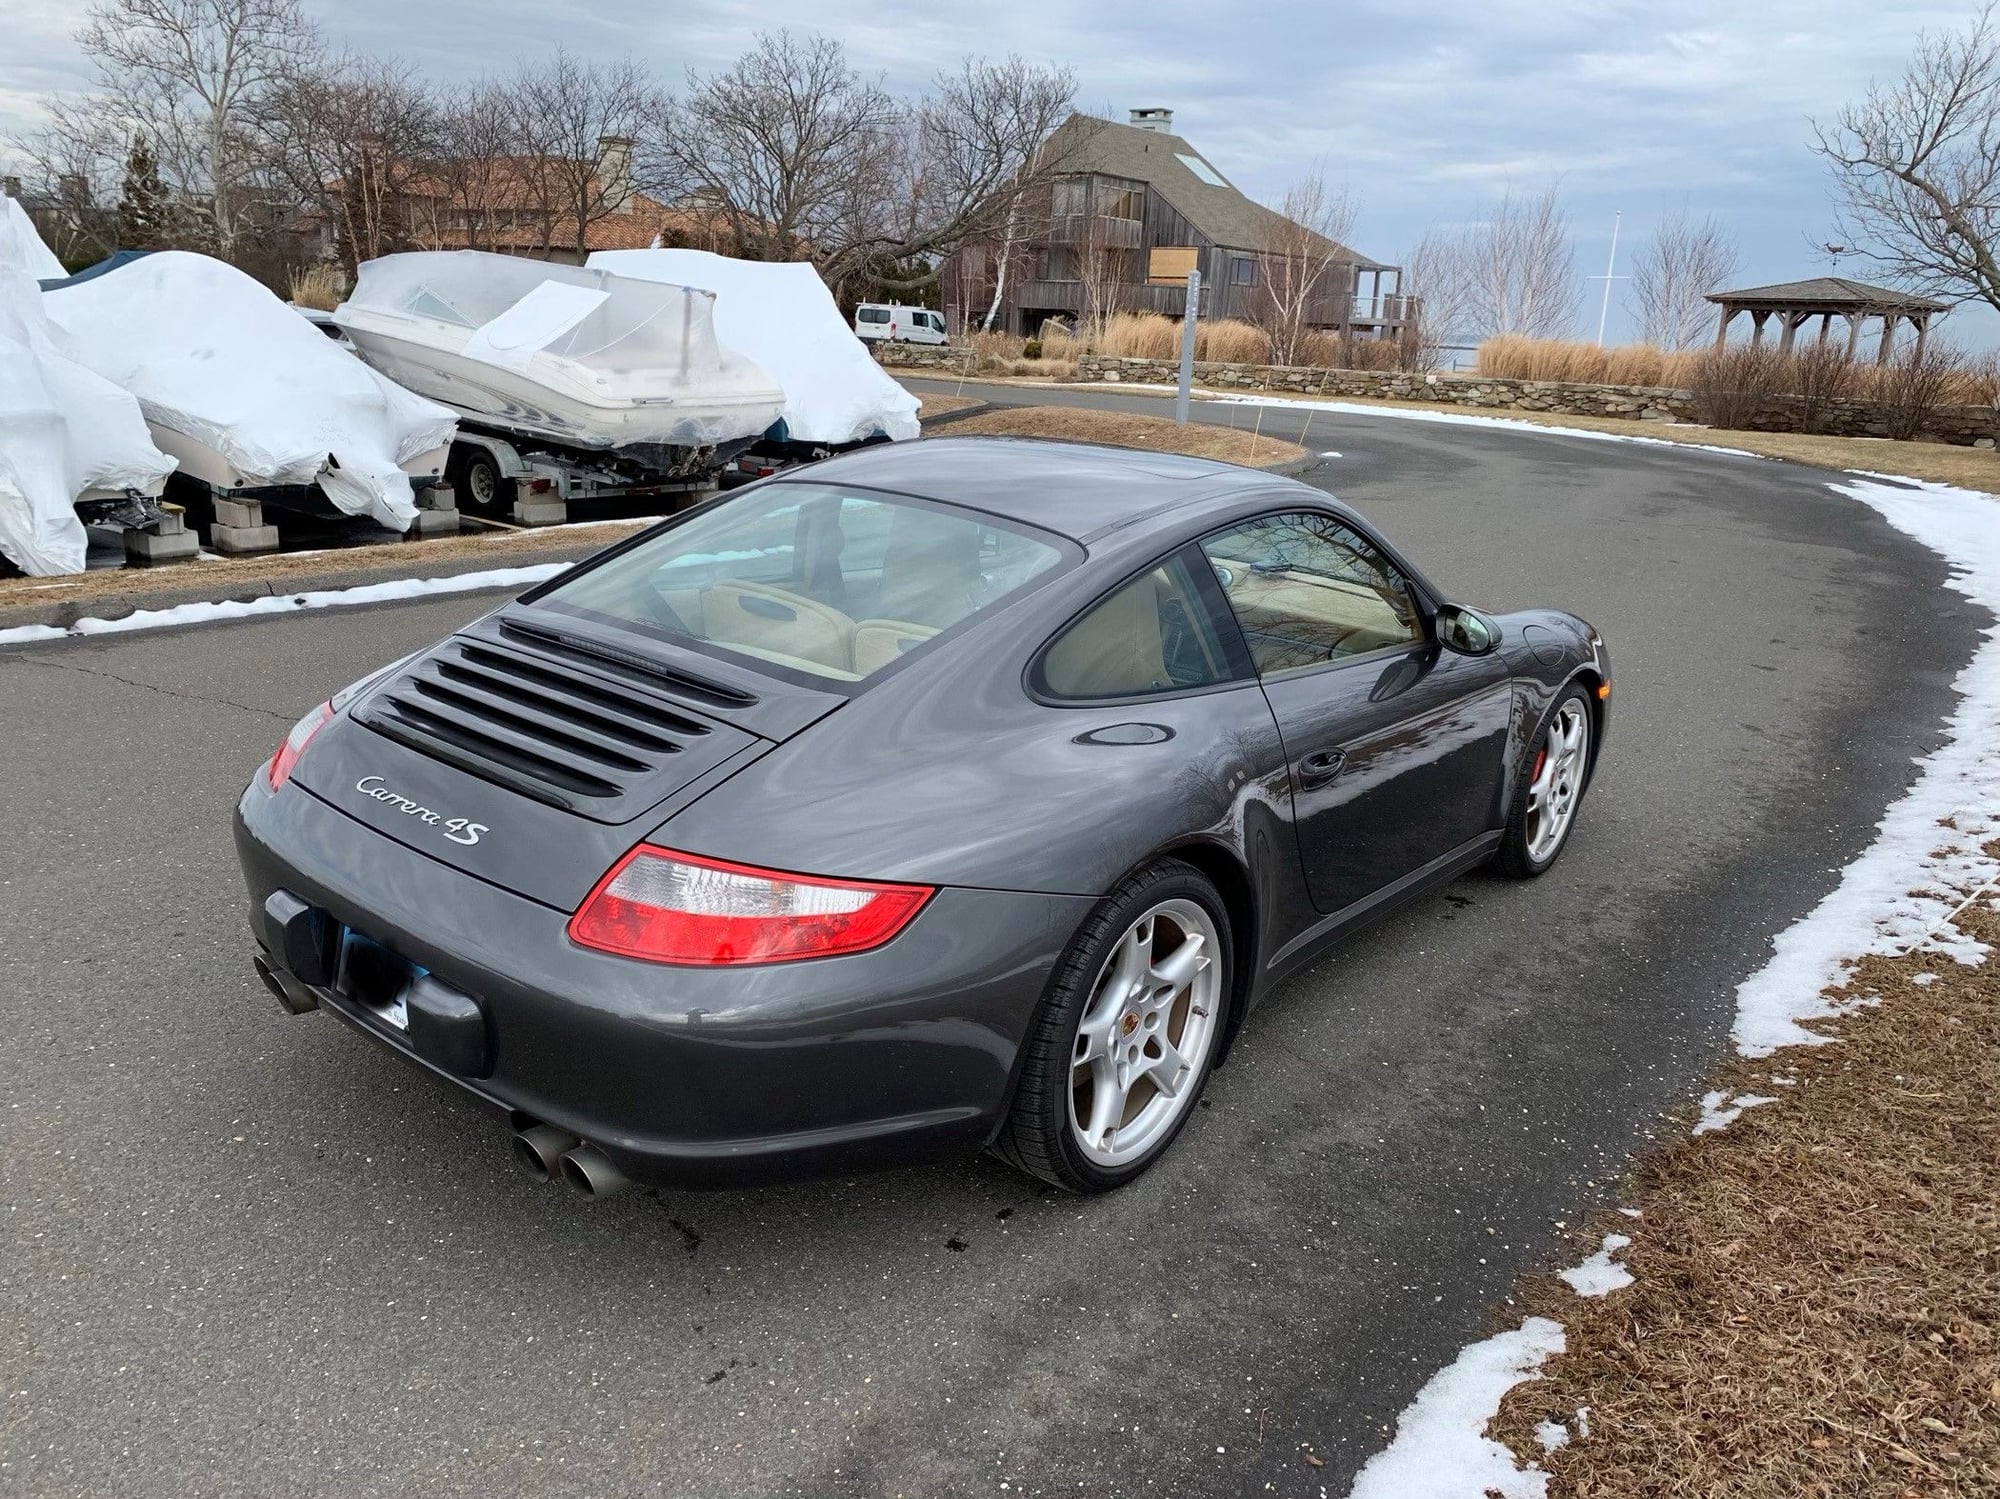 2007 Porsche 911 - 2007 Porsche 911 Carrera 4S - 6sp Manual - Used - VIN WP0AB29947S730343 - 69,500 Miles - 6 cyl - AWD - Manual - Coupe - Gray - Westport, CT 06880, United States